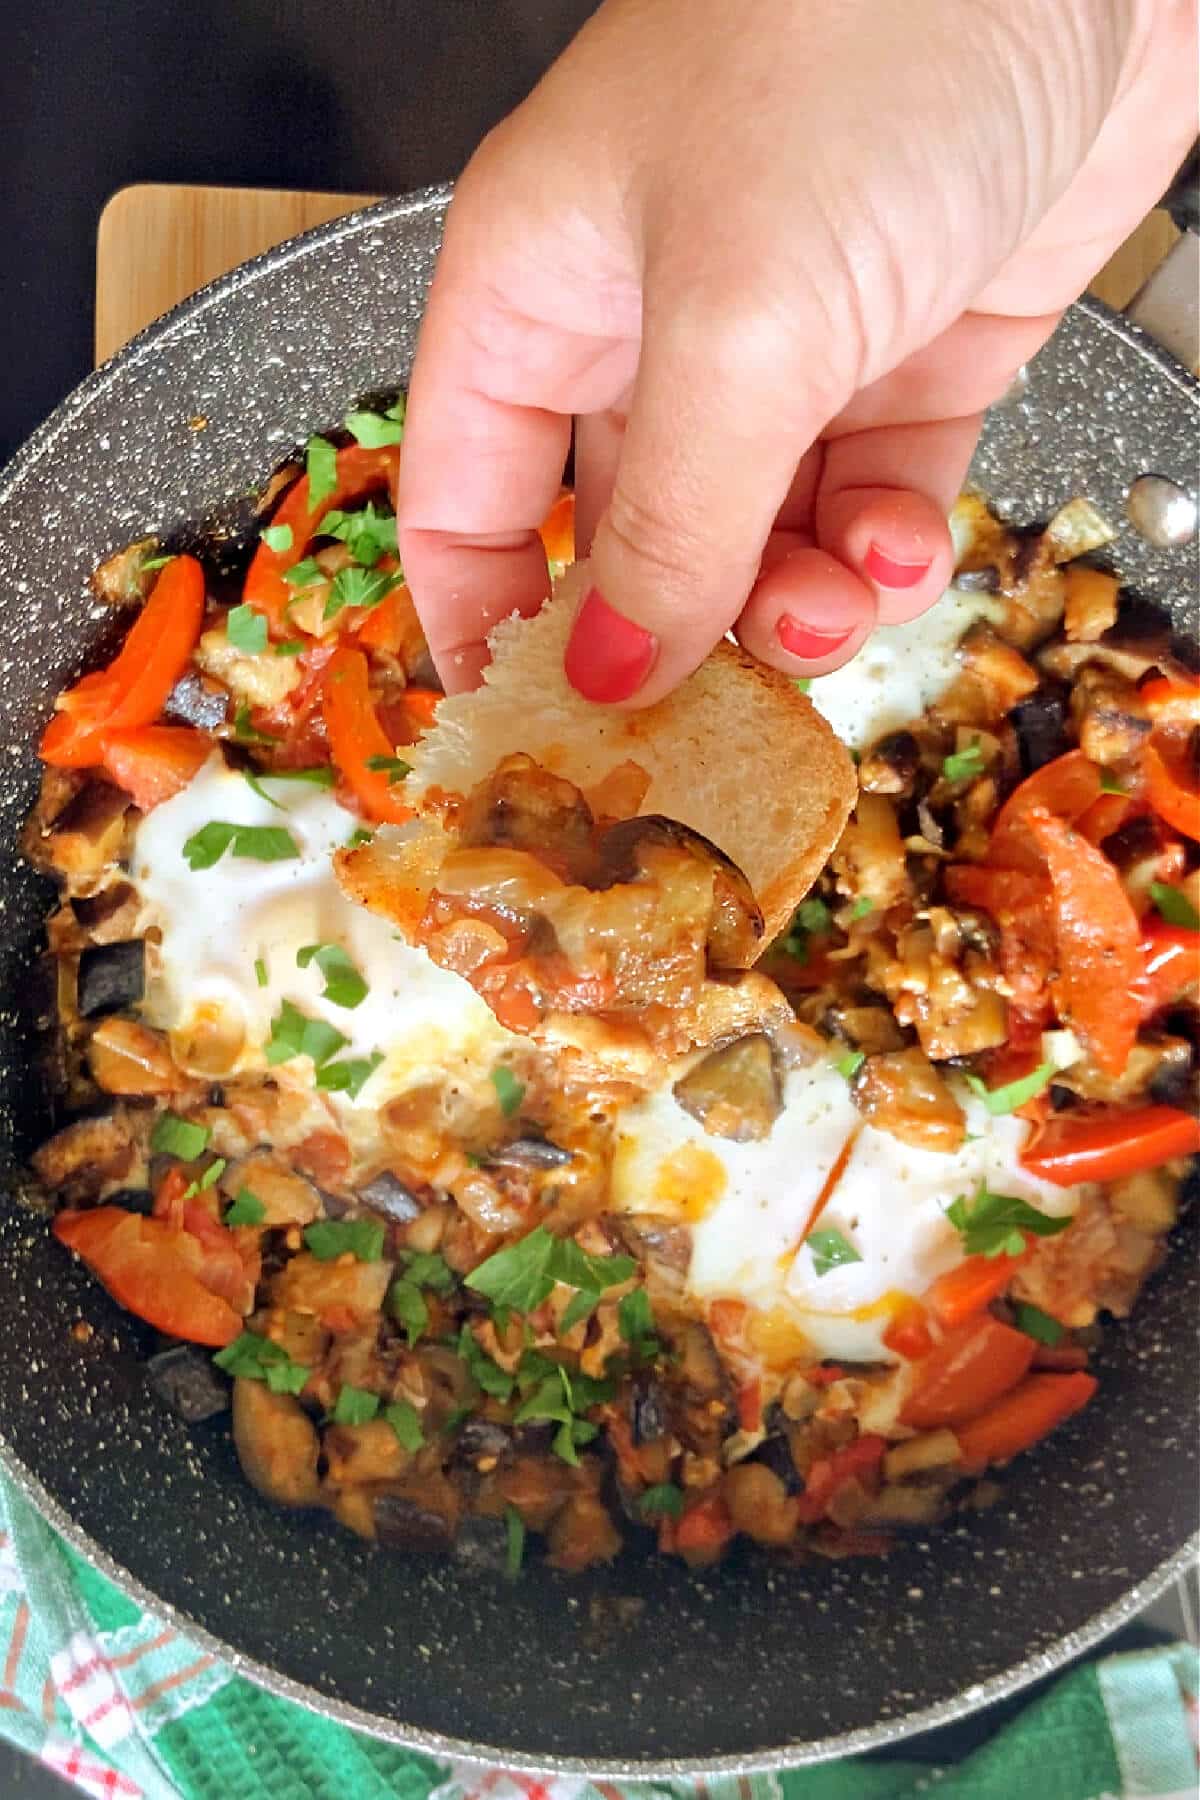 A frying pan with aubergine shakshuka and hand holding a piece of bread with shakshuka on it.